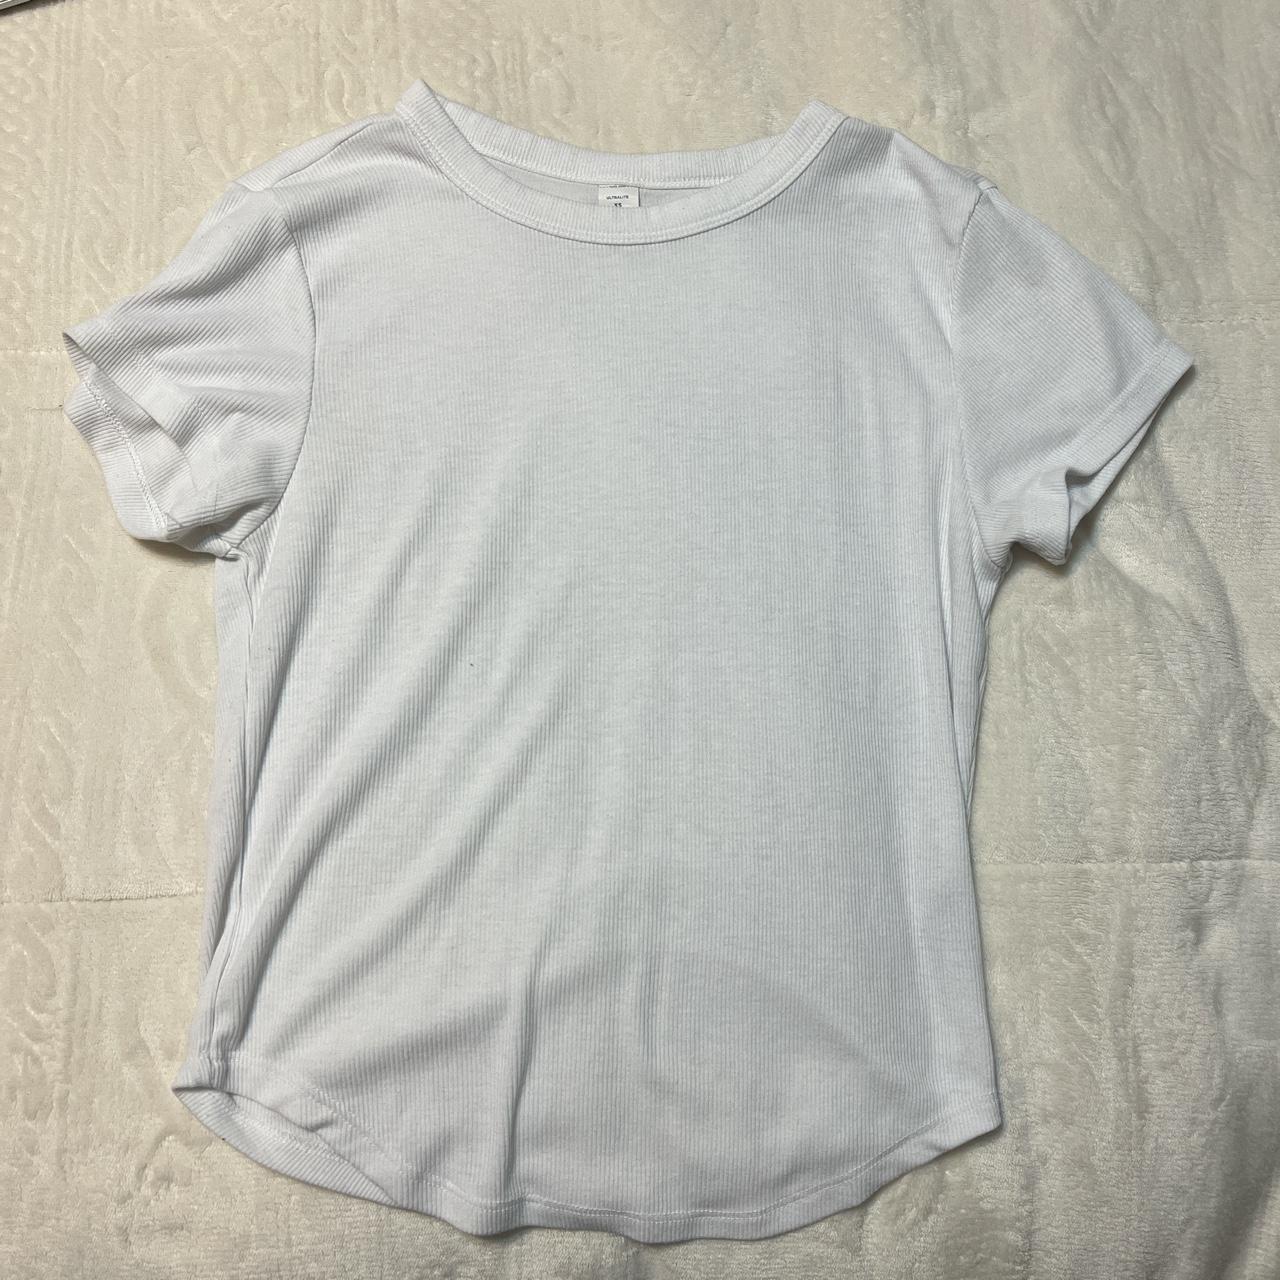 XS cropped t shirt, perfect condition - Depop